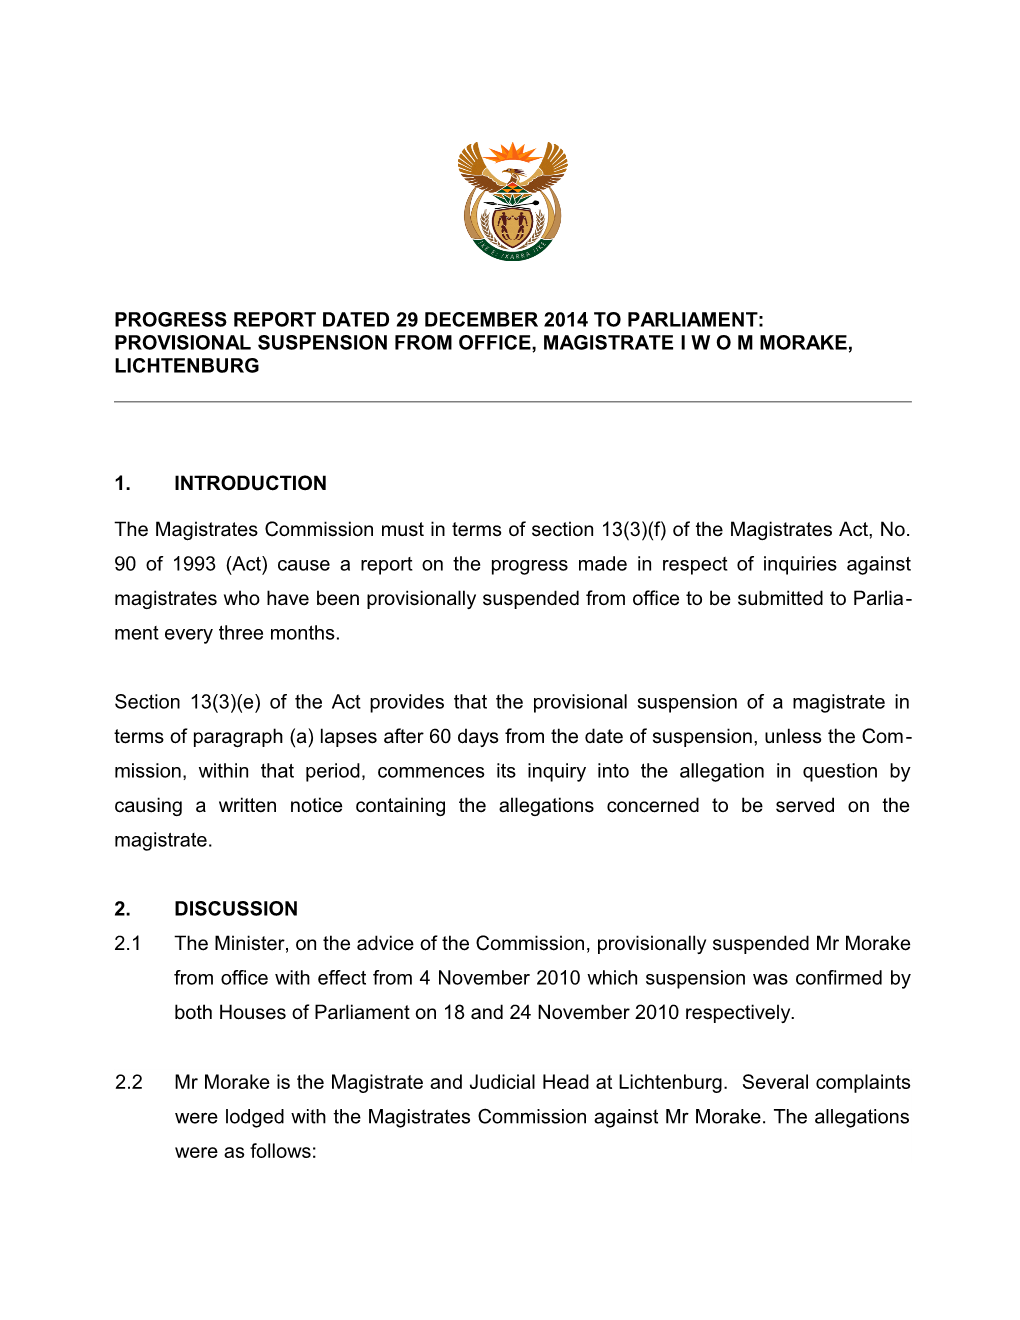 Progress Report Dated 29December 2014 to Parliament: Provisional Suspension from Office